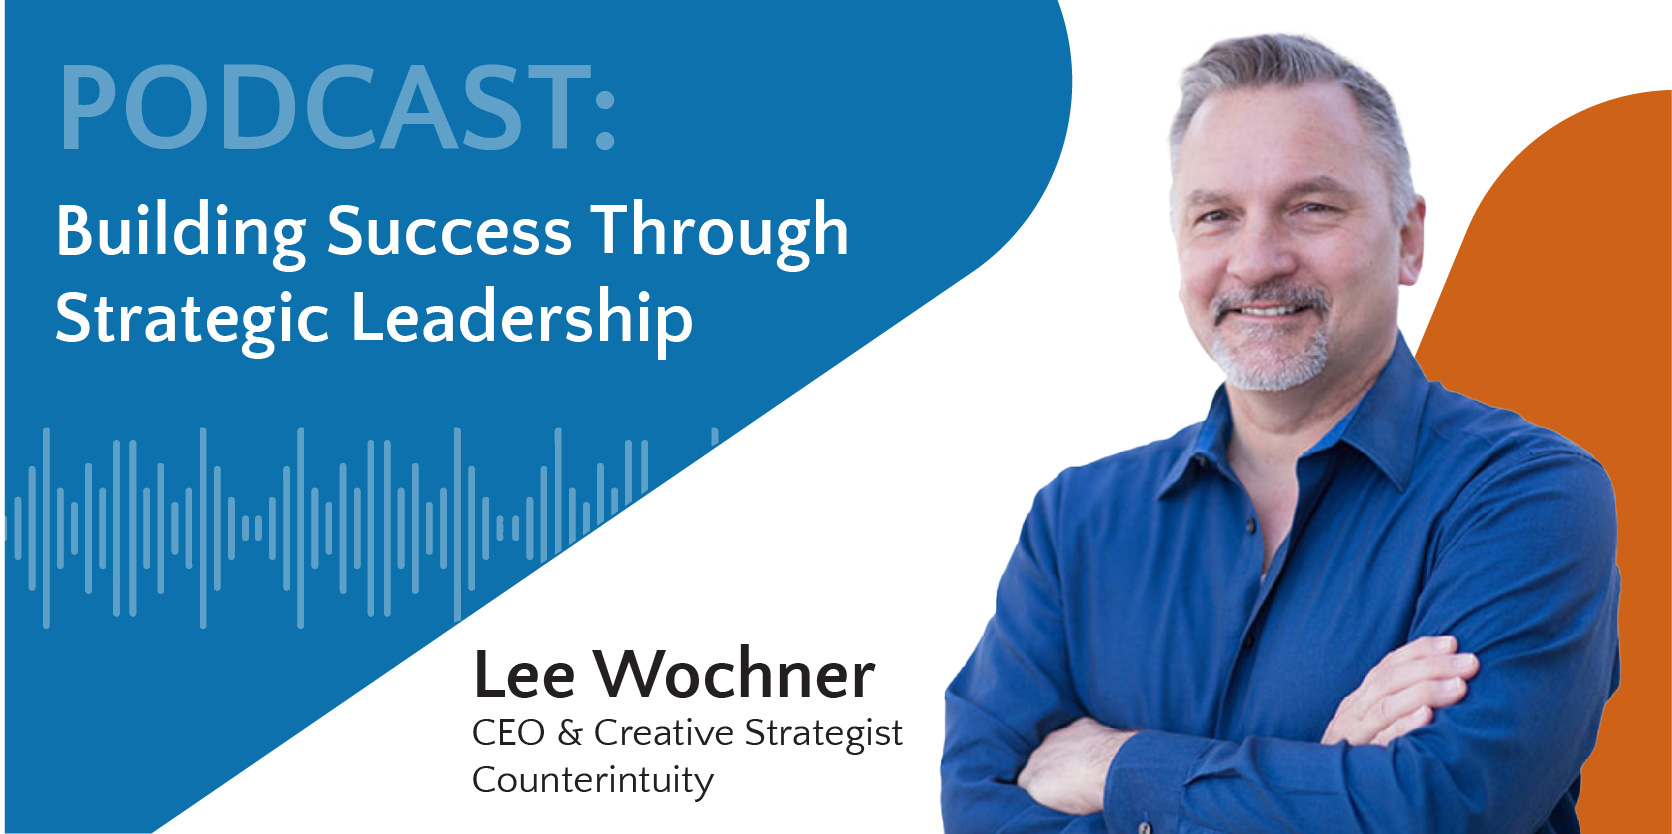 Podcast title image featuring Lee Wochner CEO and Creative Strategy of Counterintuity